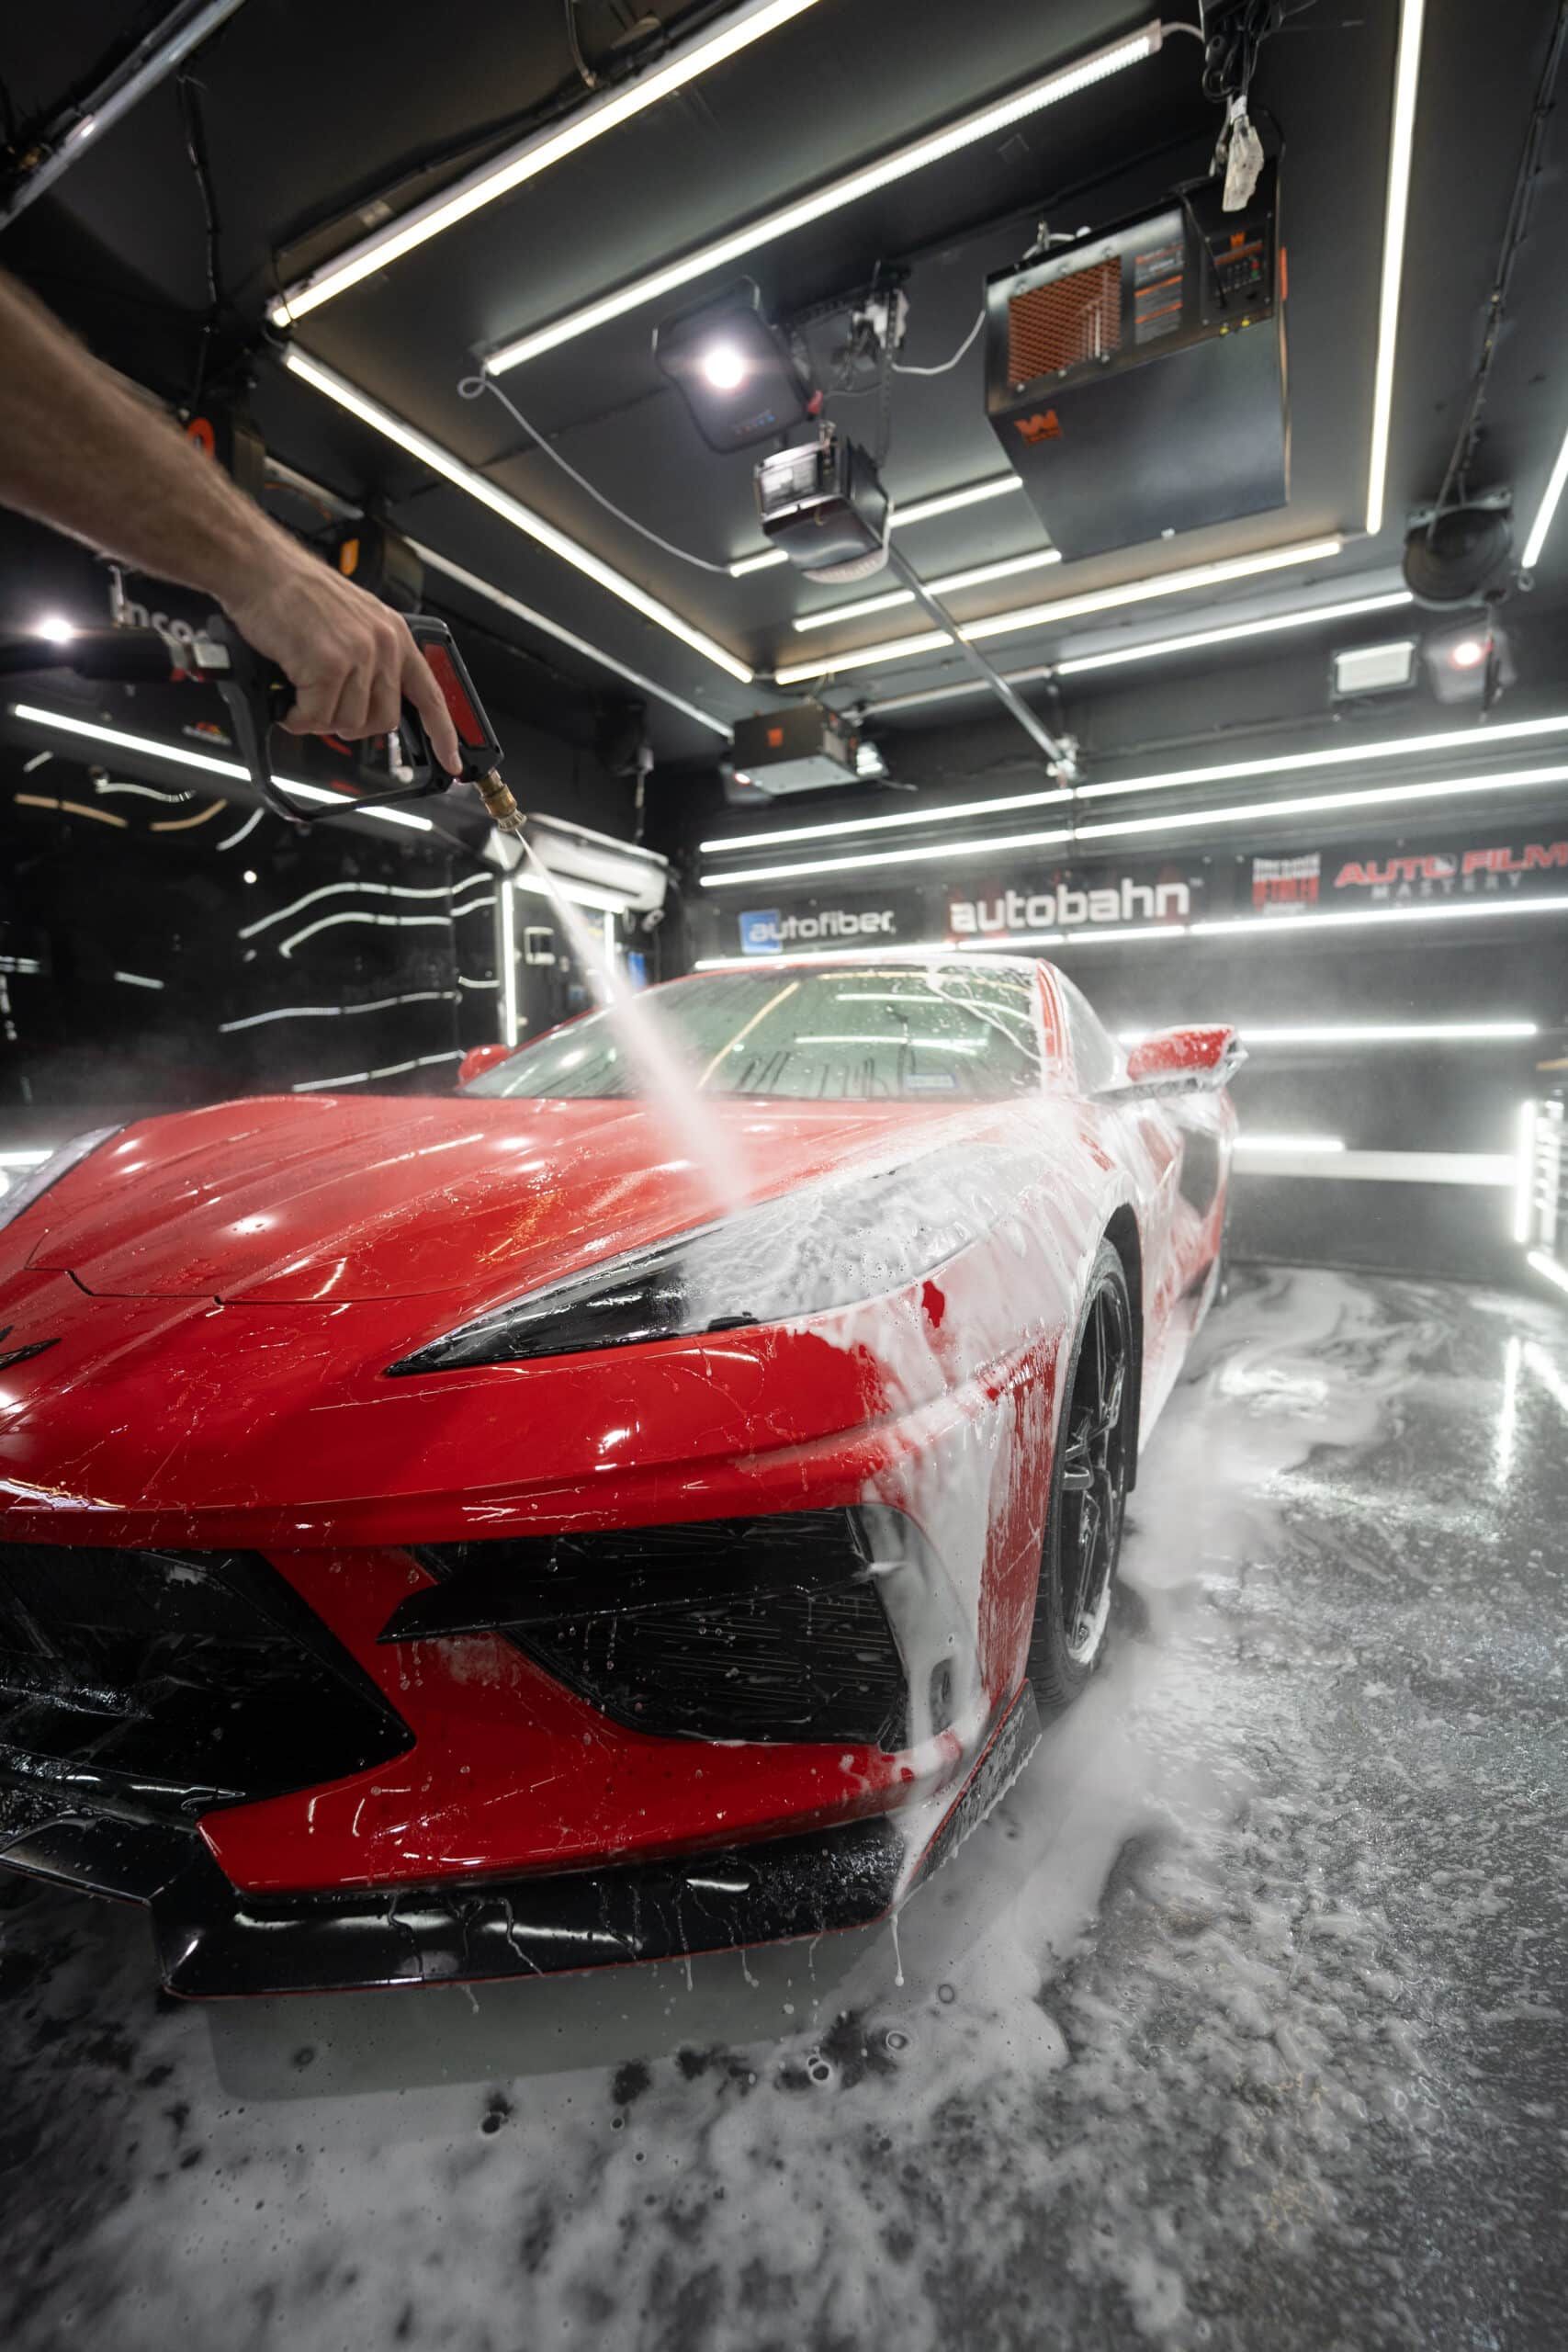 A person is washing a red sports car in a garage.